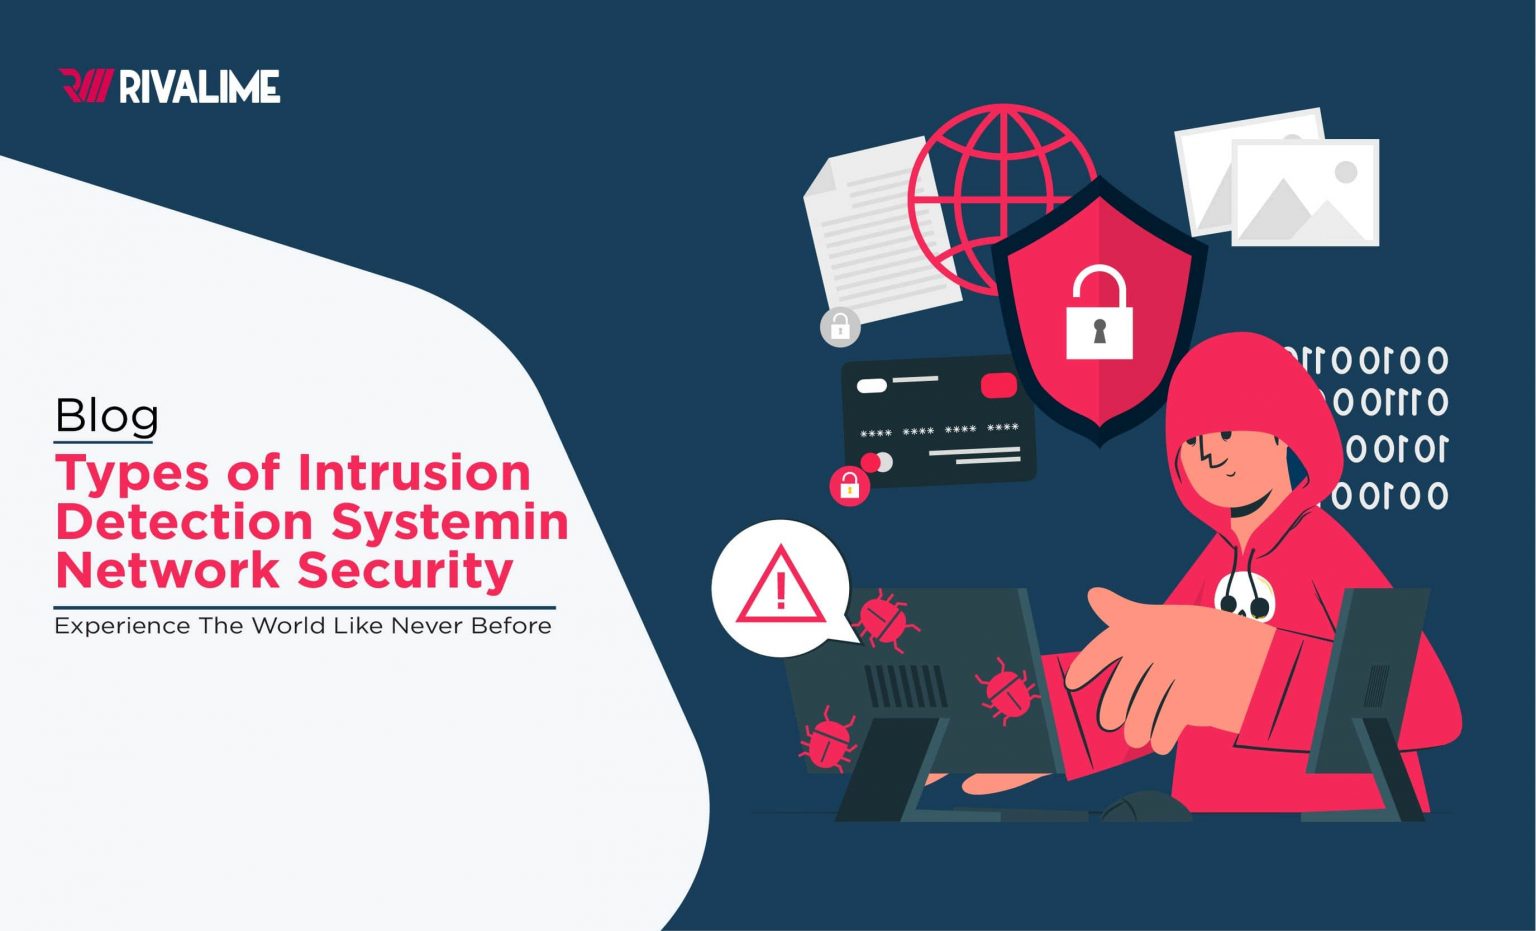 Intrusion Detection And Prevention Systems Rivalime